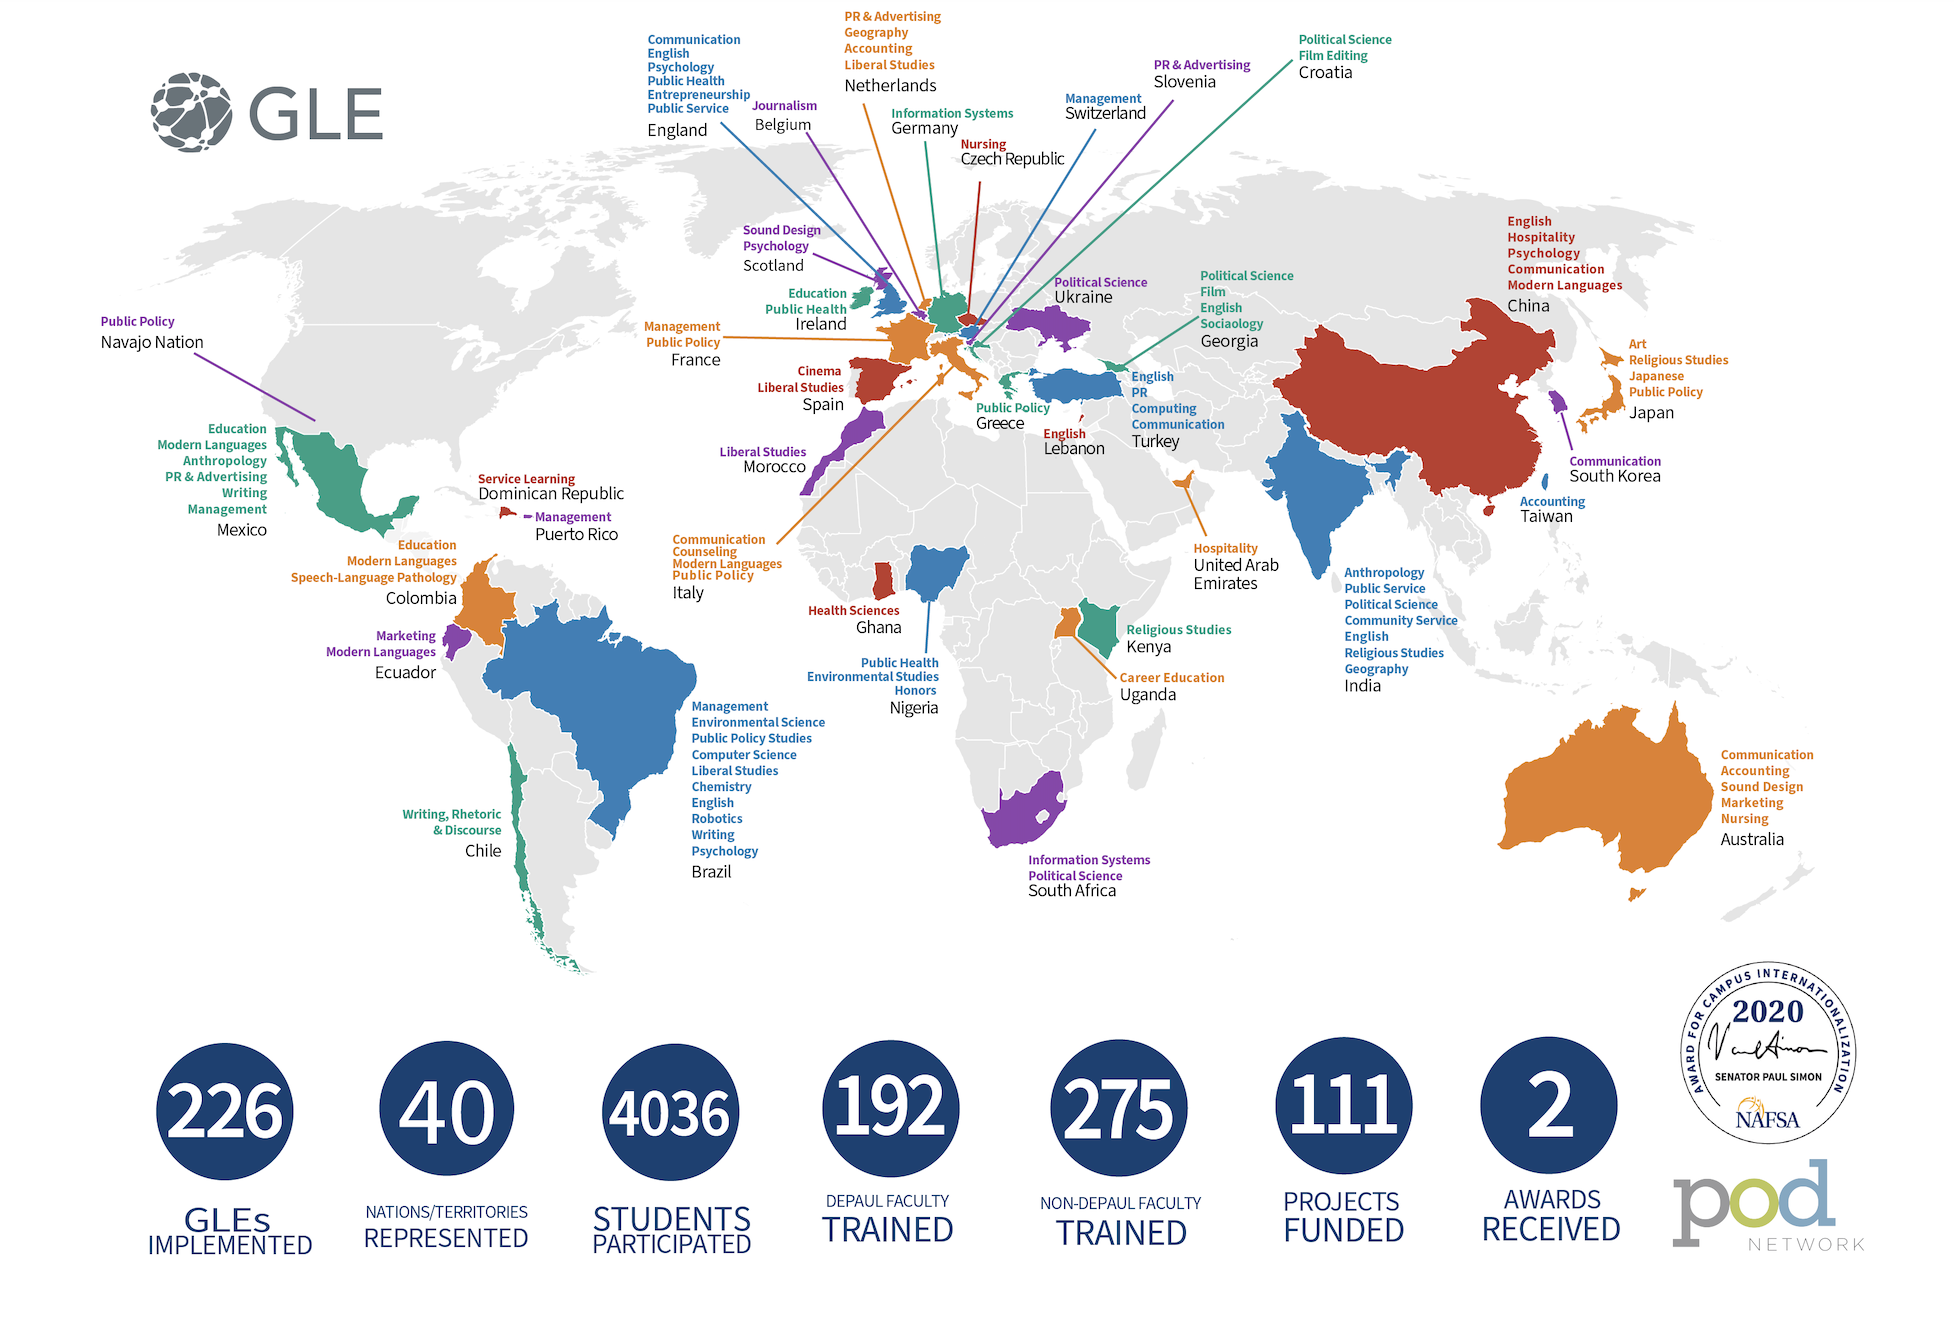 Map showing countries where GLE projects have been conducted across the world. 136 GLEs implemented in 29 countries, with 2069 students participating and 279 instructors trained.